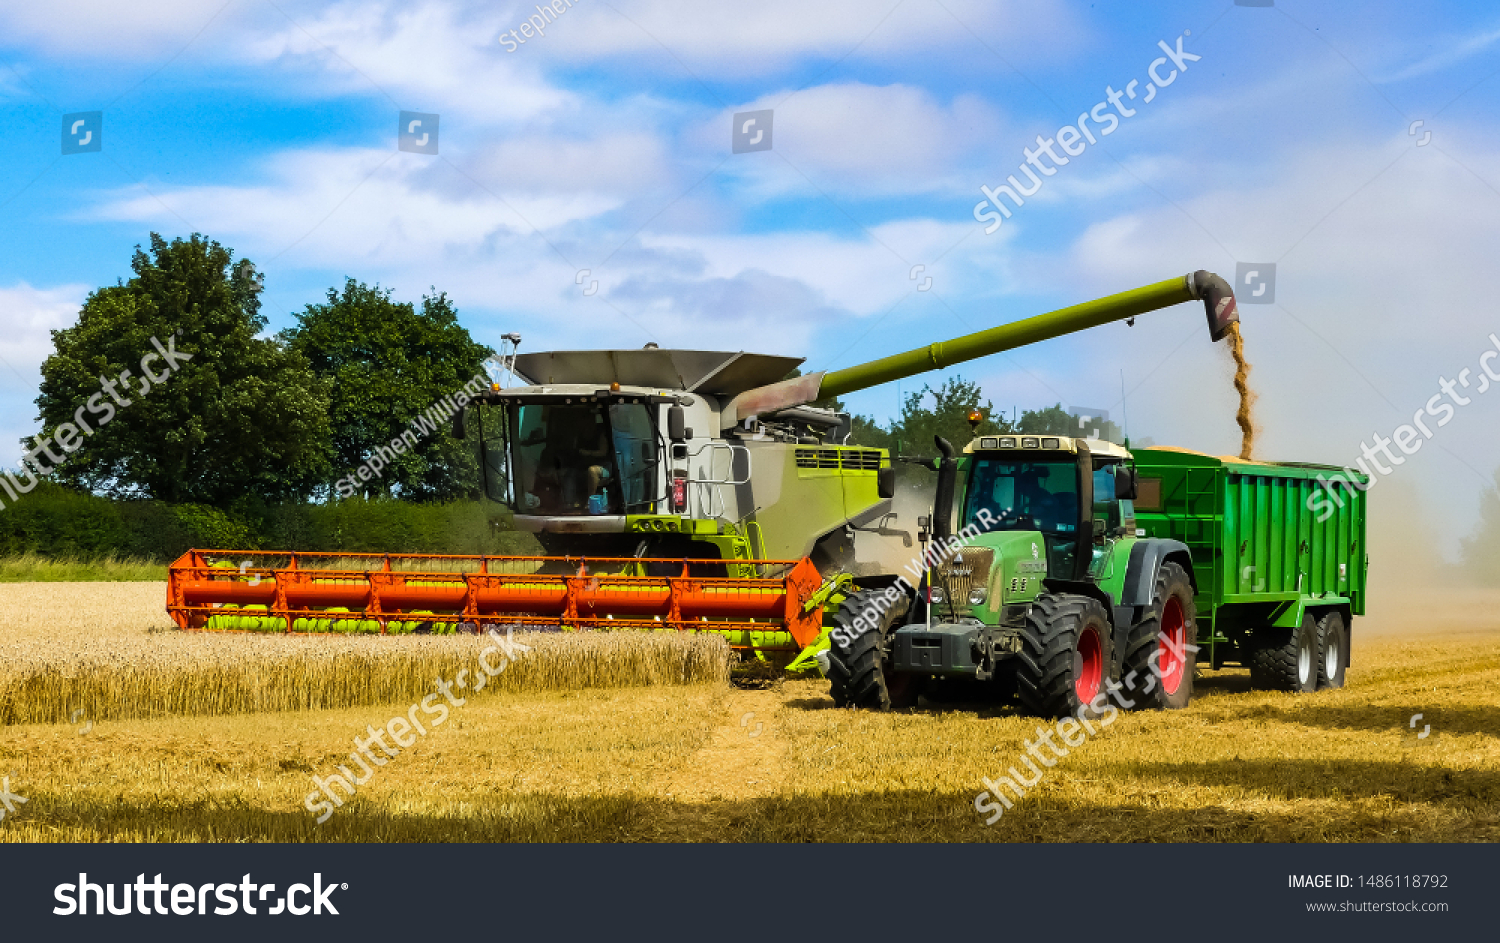 Colourful combine harvester working a wheat field with a tractor and trailer moving alongside. Grain from the elevator being uploaded. Dust cloud behind. Landscape image with space for copy. England. #1486118792